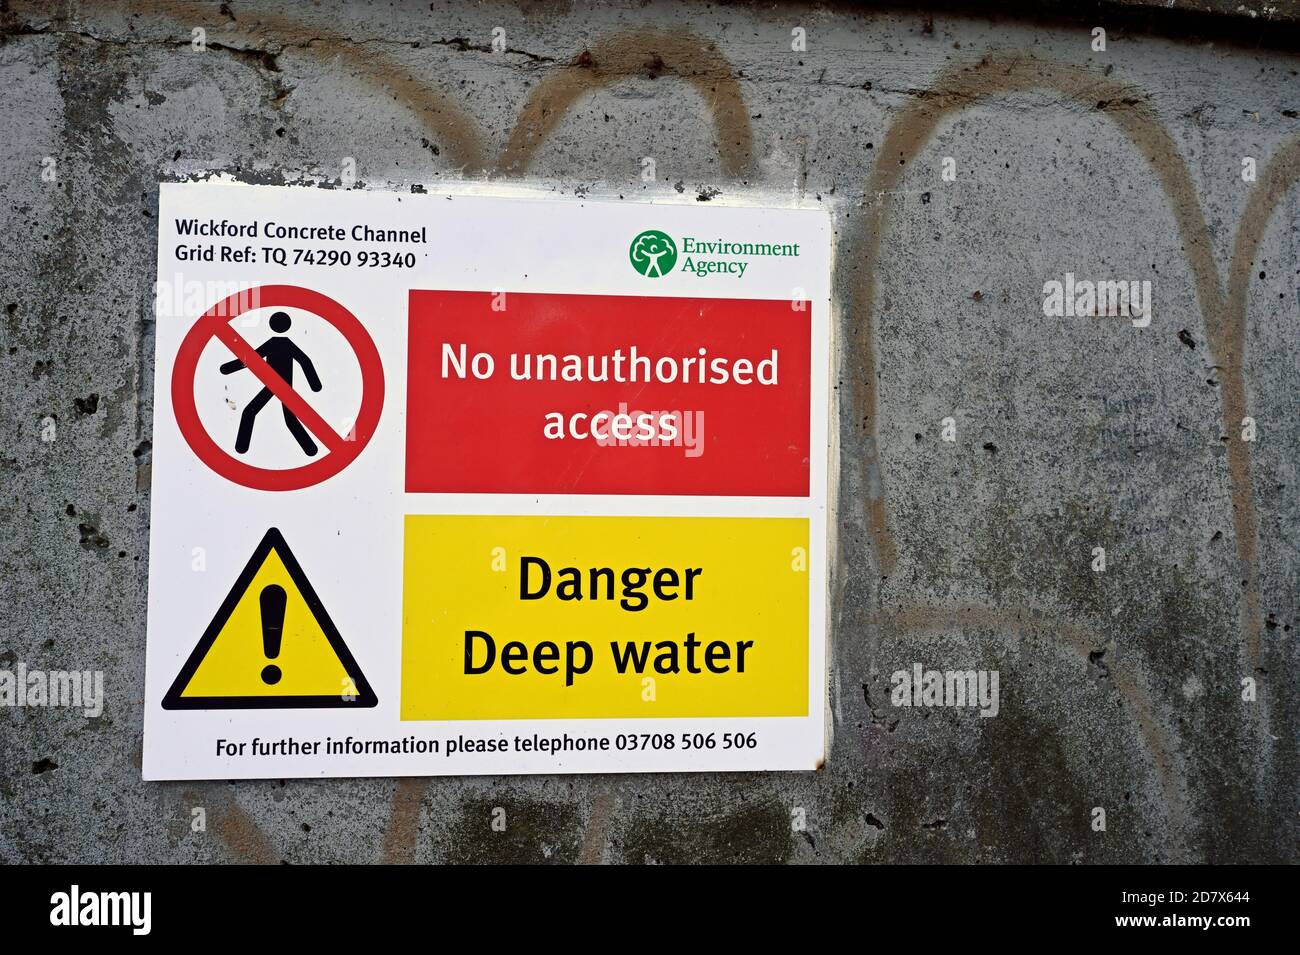 A recently installed (Oct 20) warning notice at the London Rd Bridge, Wickford Essex. UK. Danger Deep water.  No unauthorised access. TQ 74290 93340 Stock Photo